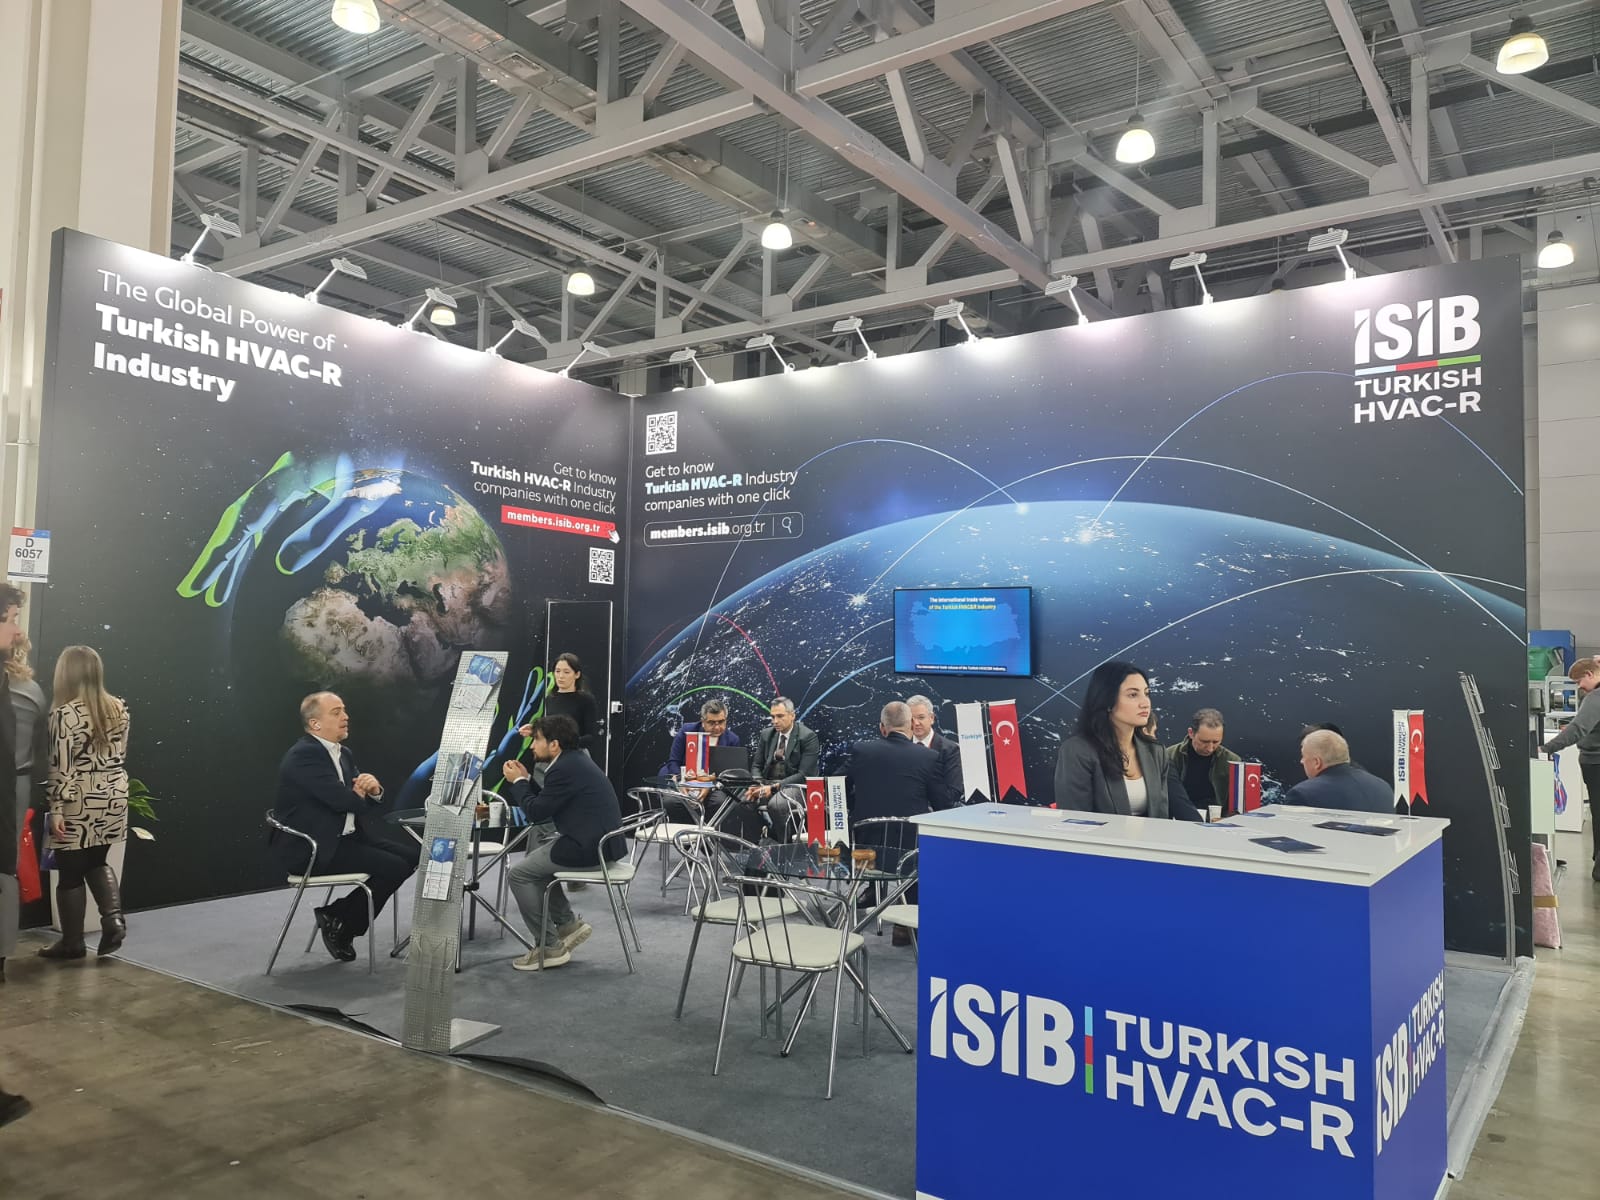 Turkish HVAC-R Industry Participates Significantly in Exhibitions in Russia - 5